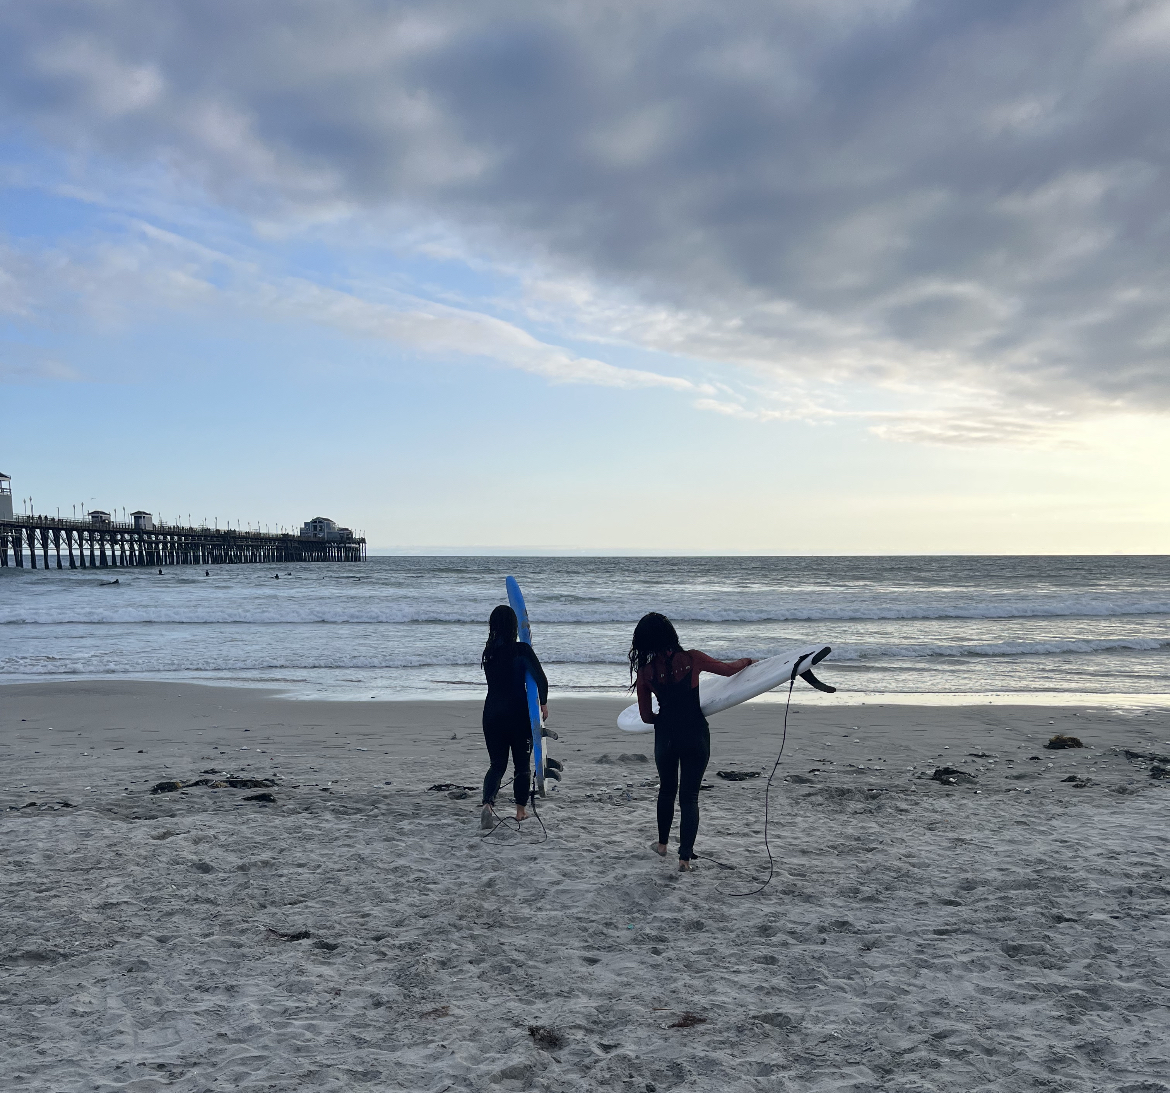 Two+surfers+are+hitting+the+waves.+In+Oceanside+beach%2C+July+6th+Maddy+Donlon+and+Genevieve+Saito+went+to+ride+the+waves.+Genevieve+says%2C+%C2%A8The+feeling+of+sitting+on+the+waves+is+unexplainable.%C2%A8